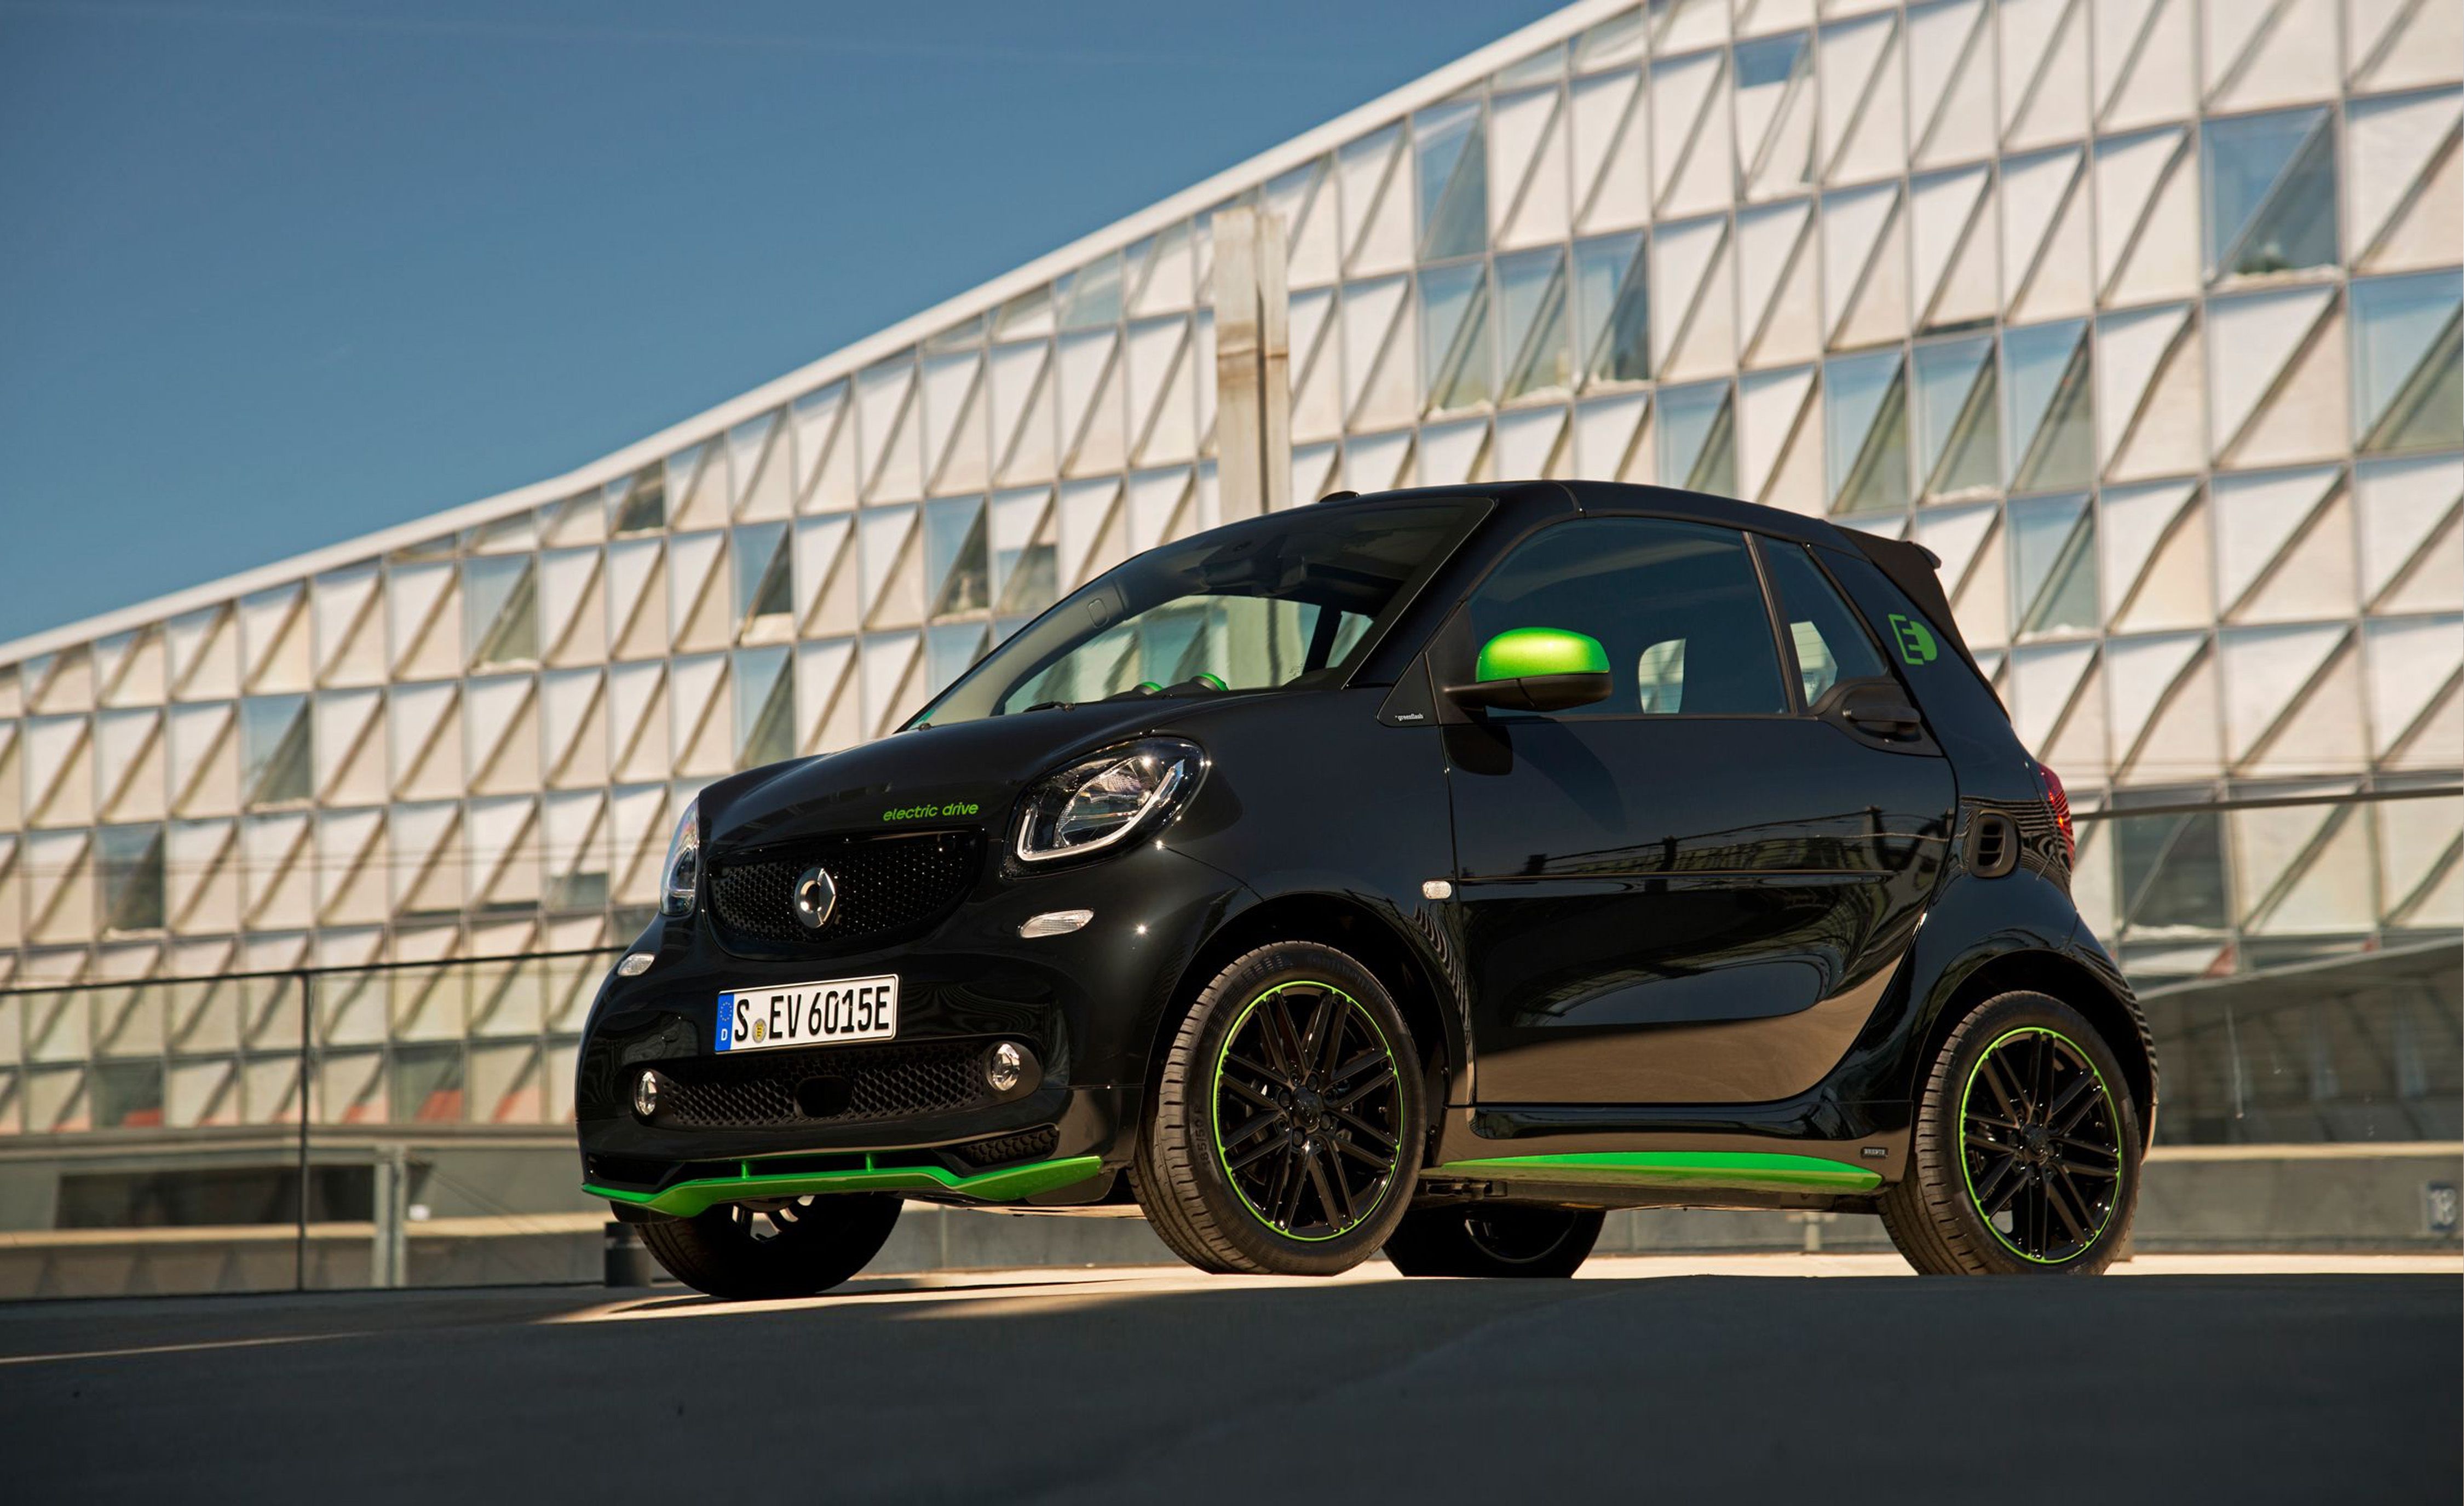 2018 Smart Fortwo Electric Drive Reviews Smart Fortwo Electric Drive